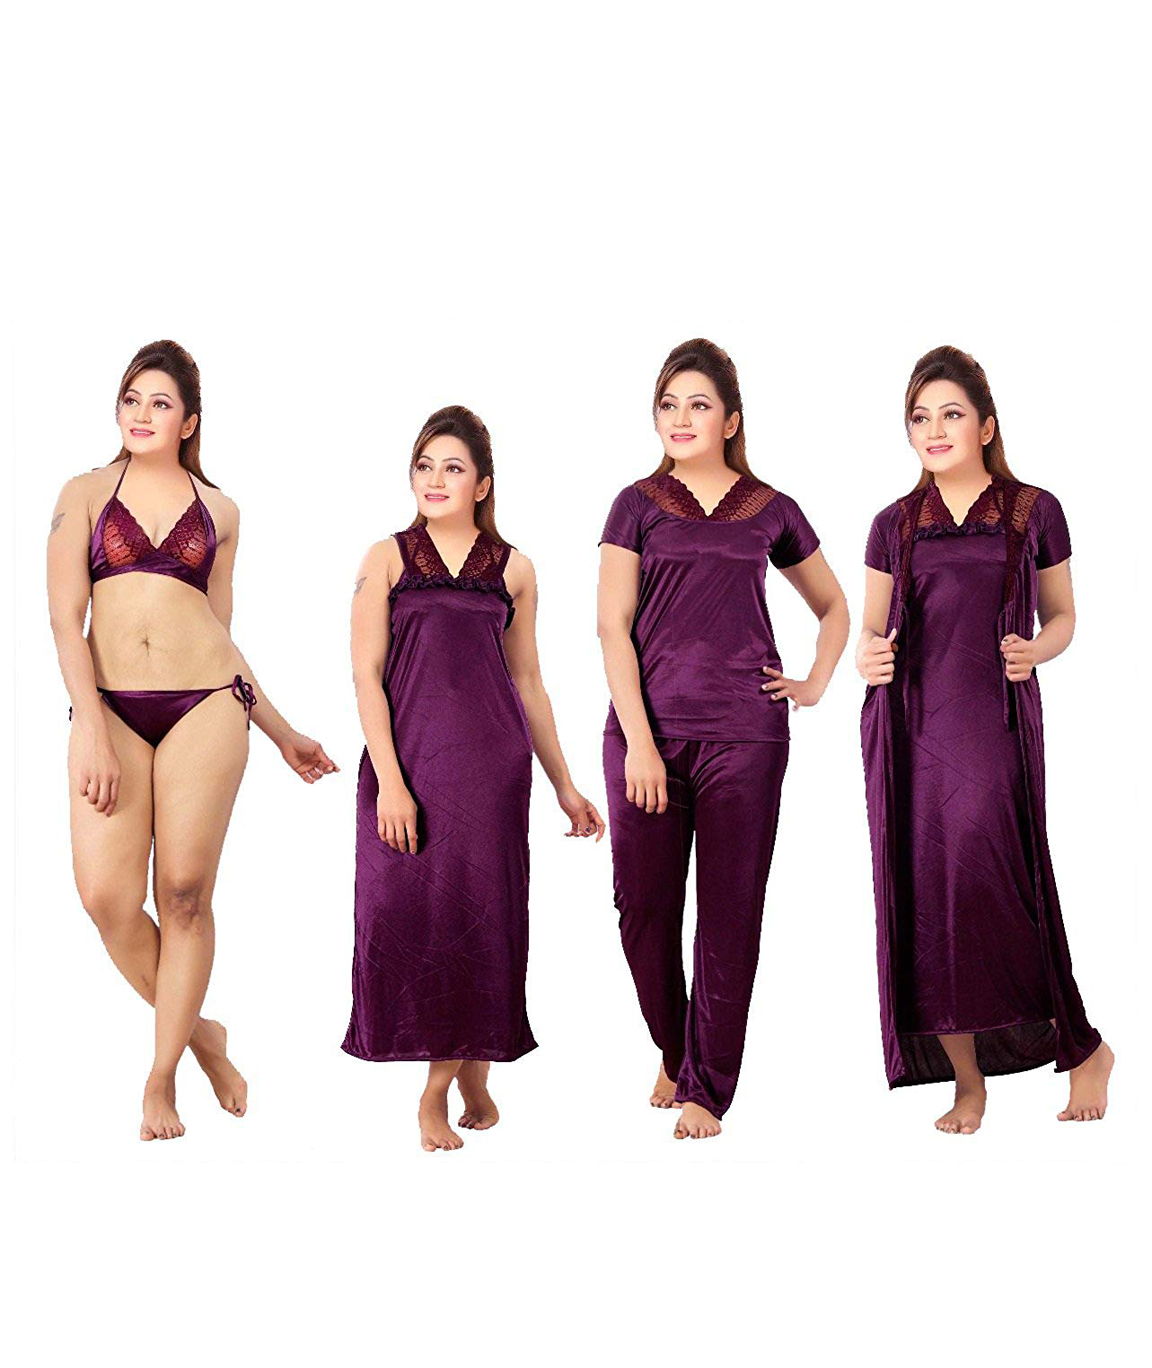 https://www.manthanonline.in/uploadImages/productimage/romaisa-women-s-satin-nighty-wrap-gown-top-pajama-bra-and-thong-free-size-pack-of-6-colour-wine-z.jpg